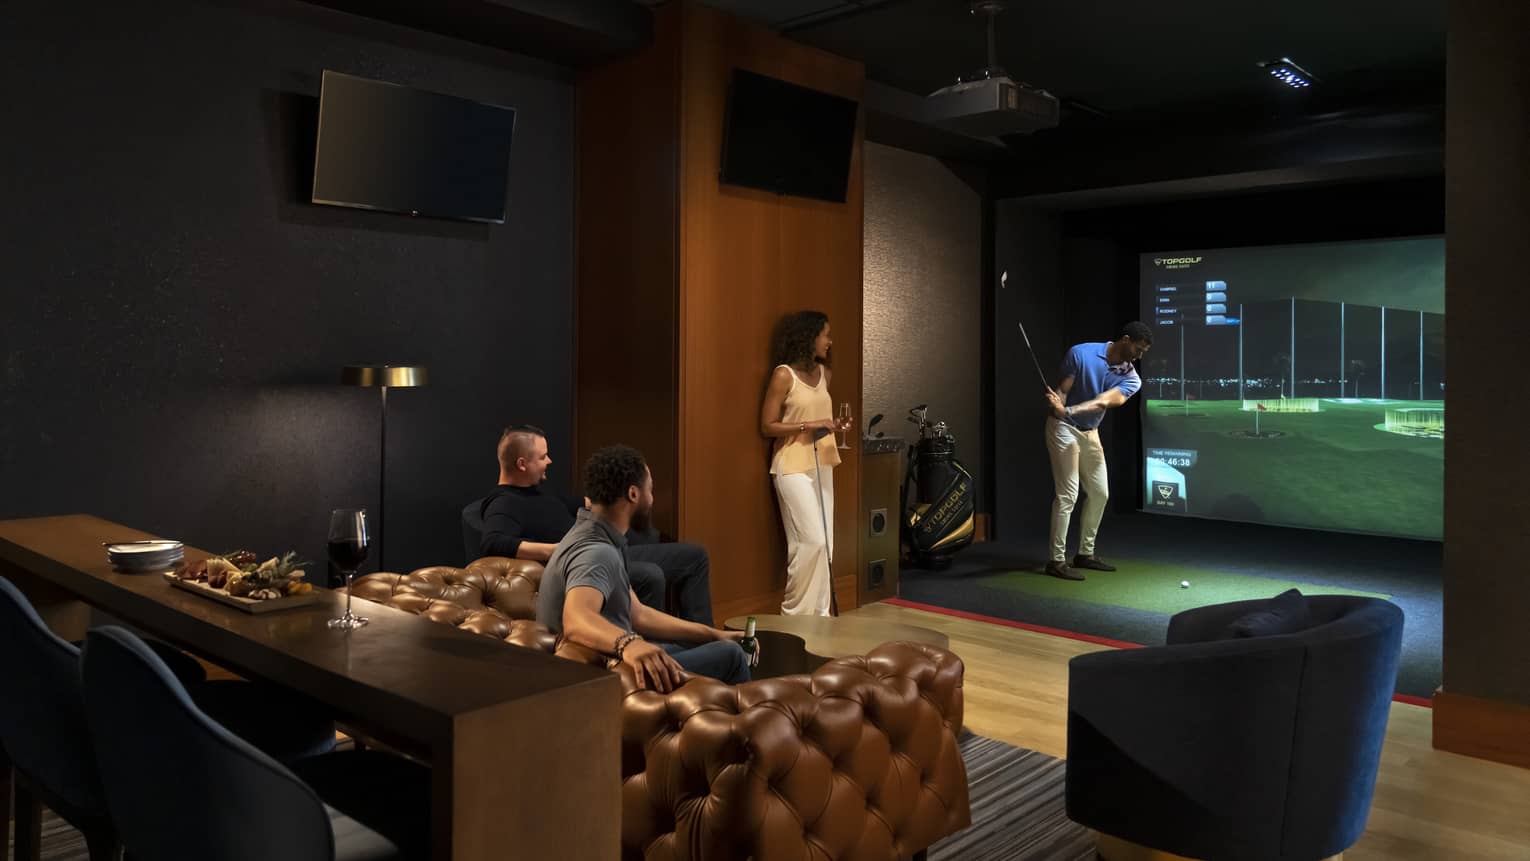 A group of people watching and playing a virtual golf game.